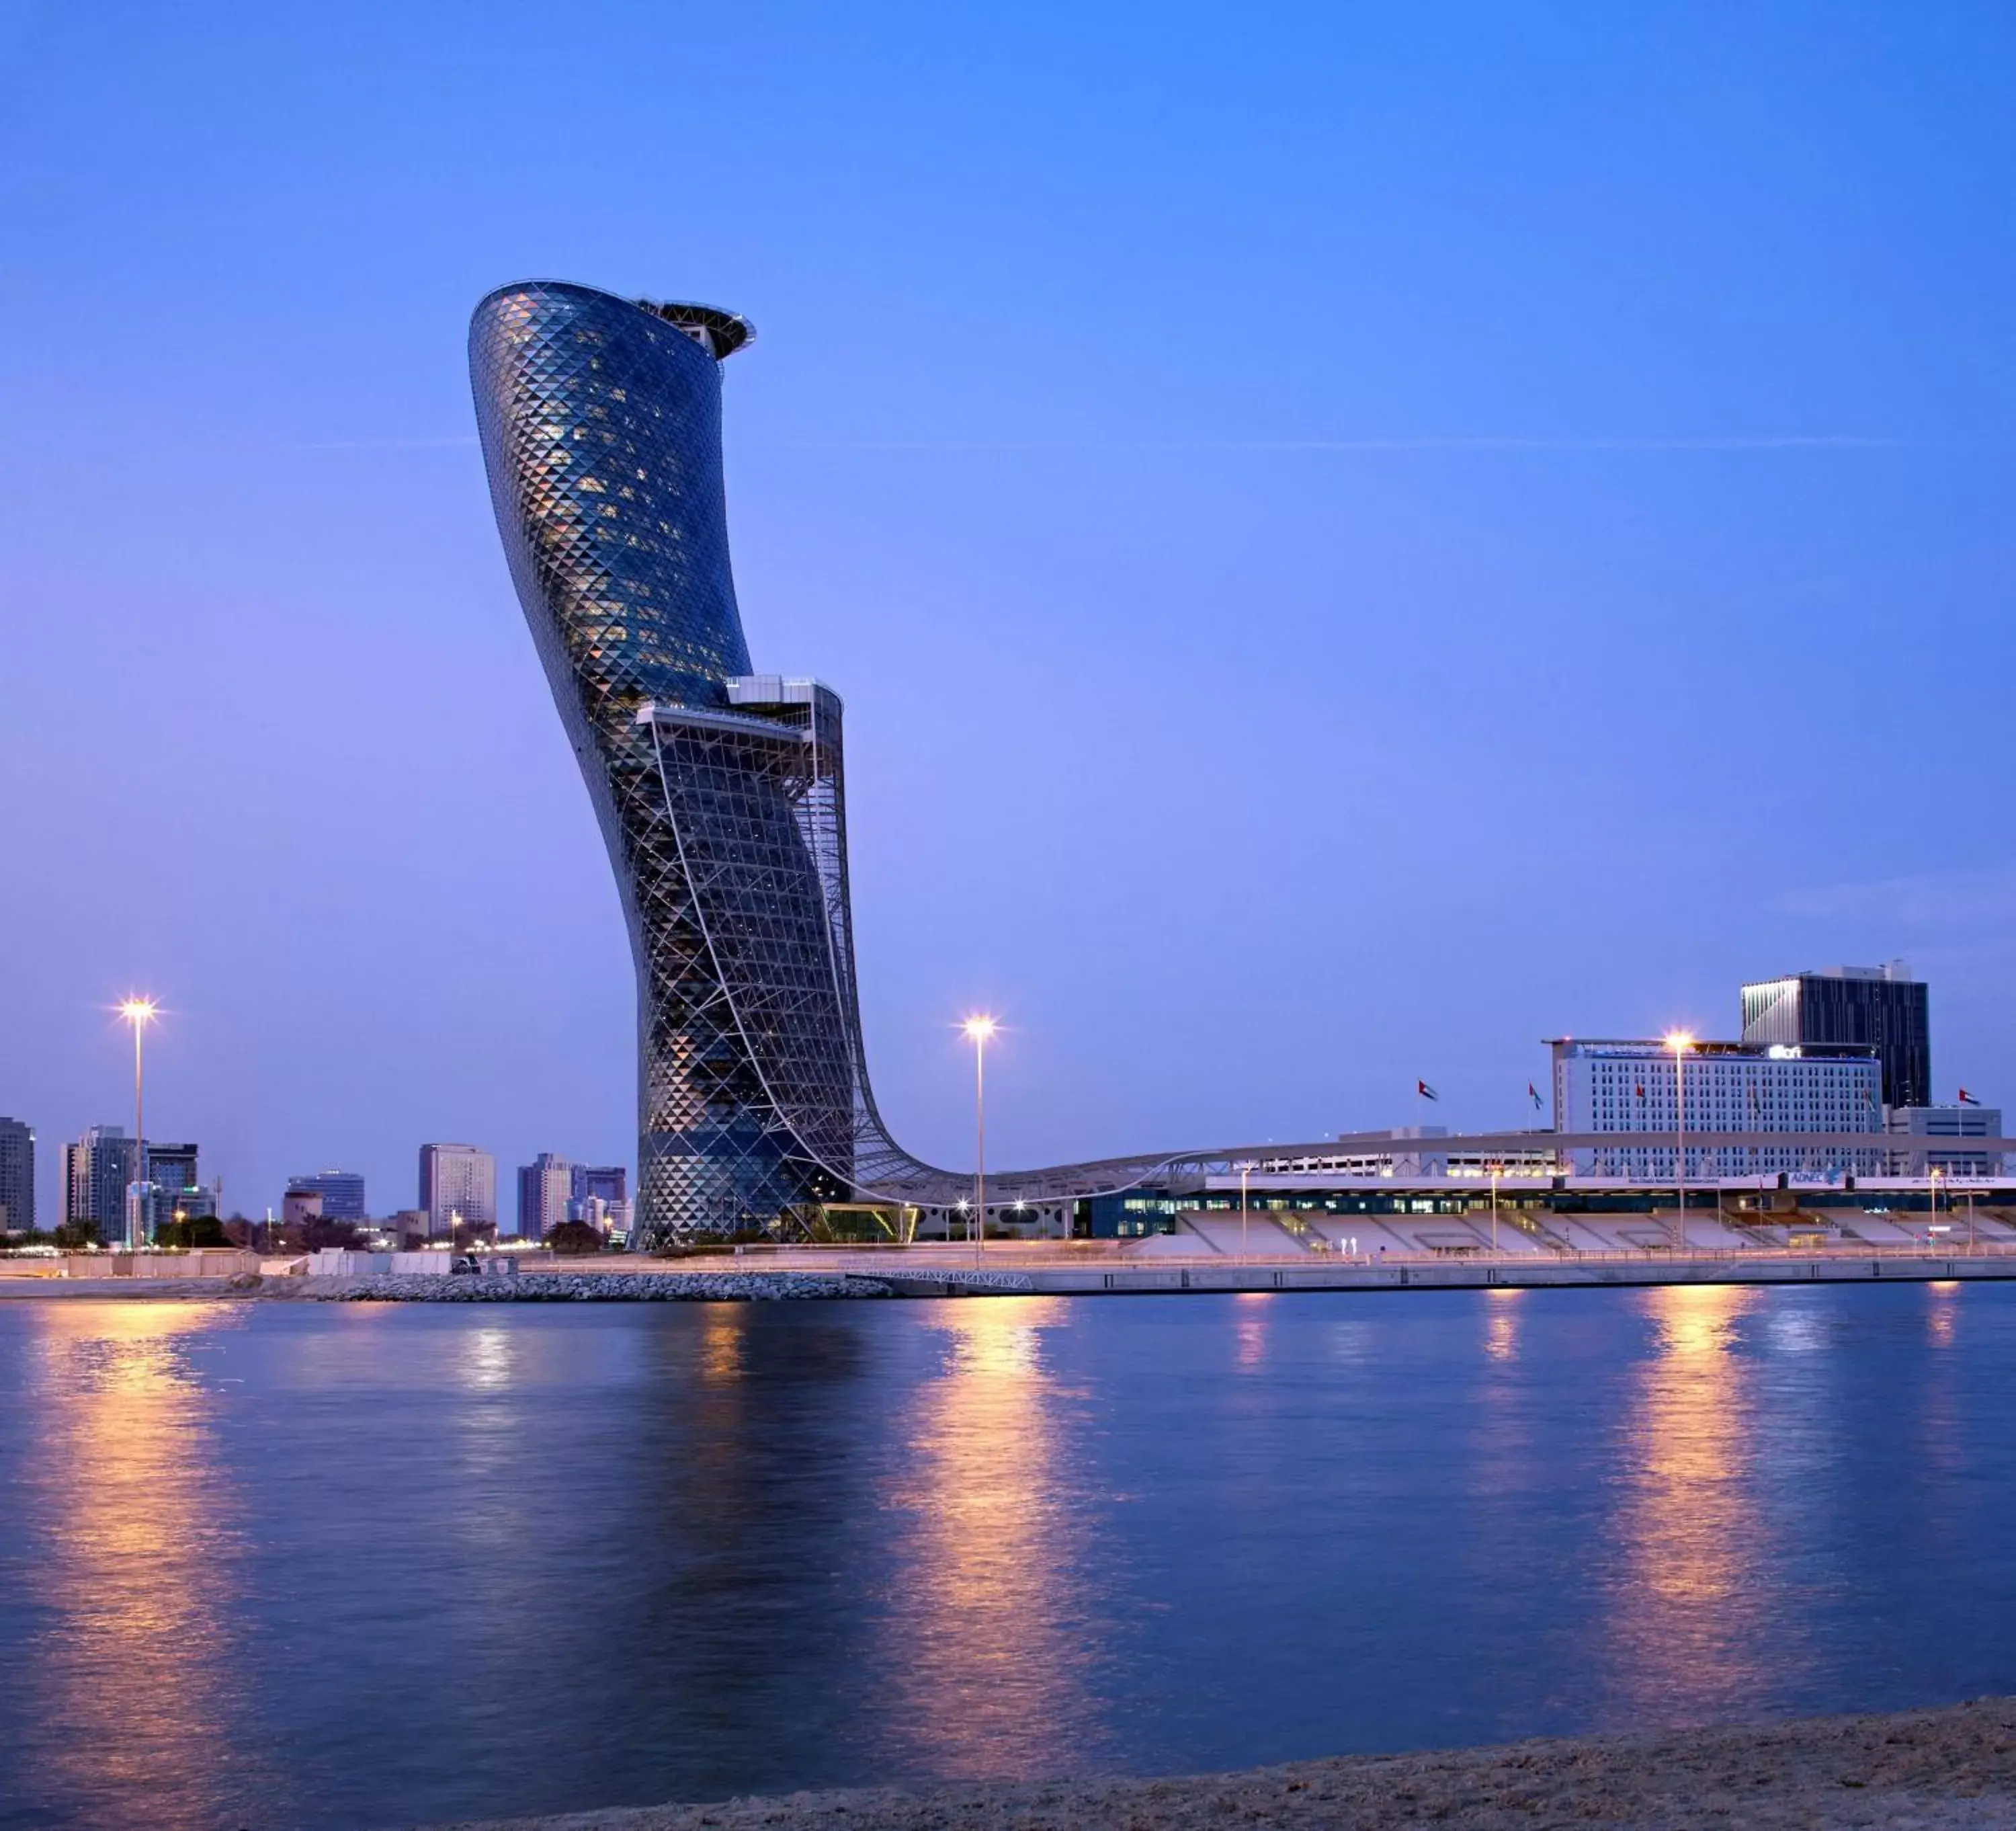 Property building in Andaz Capital Gate Abu Dhabi - a concept by Hyatt